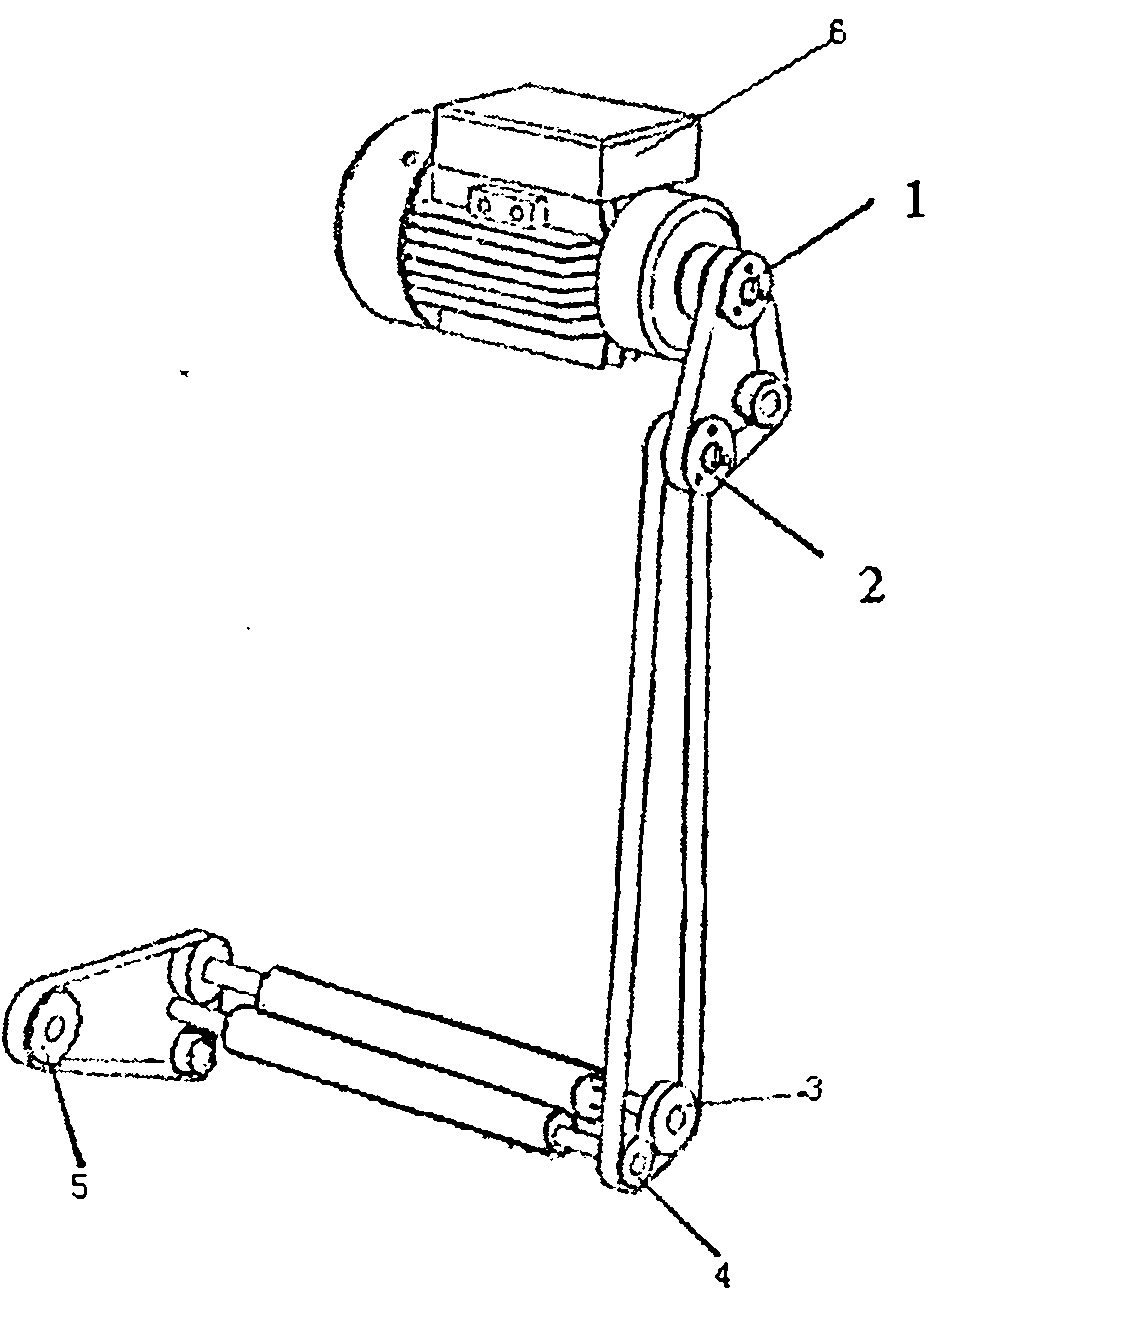 Control method for conveniently adjusting stem-removing quantity of cigarette making machine